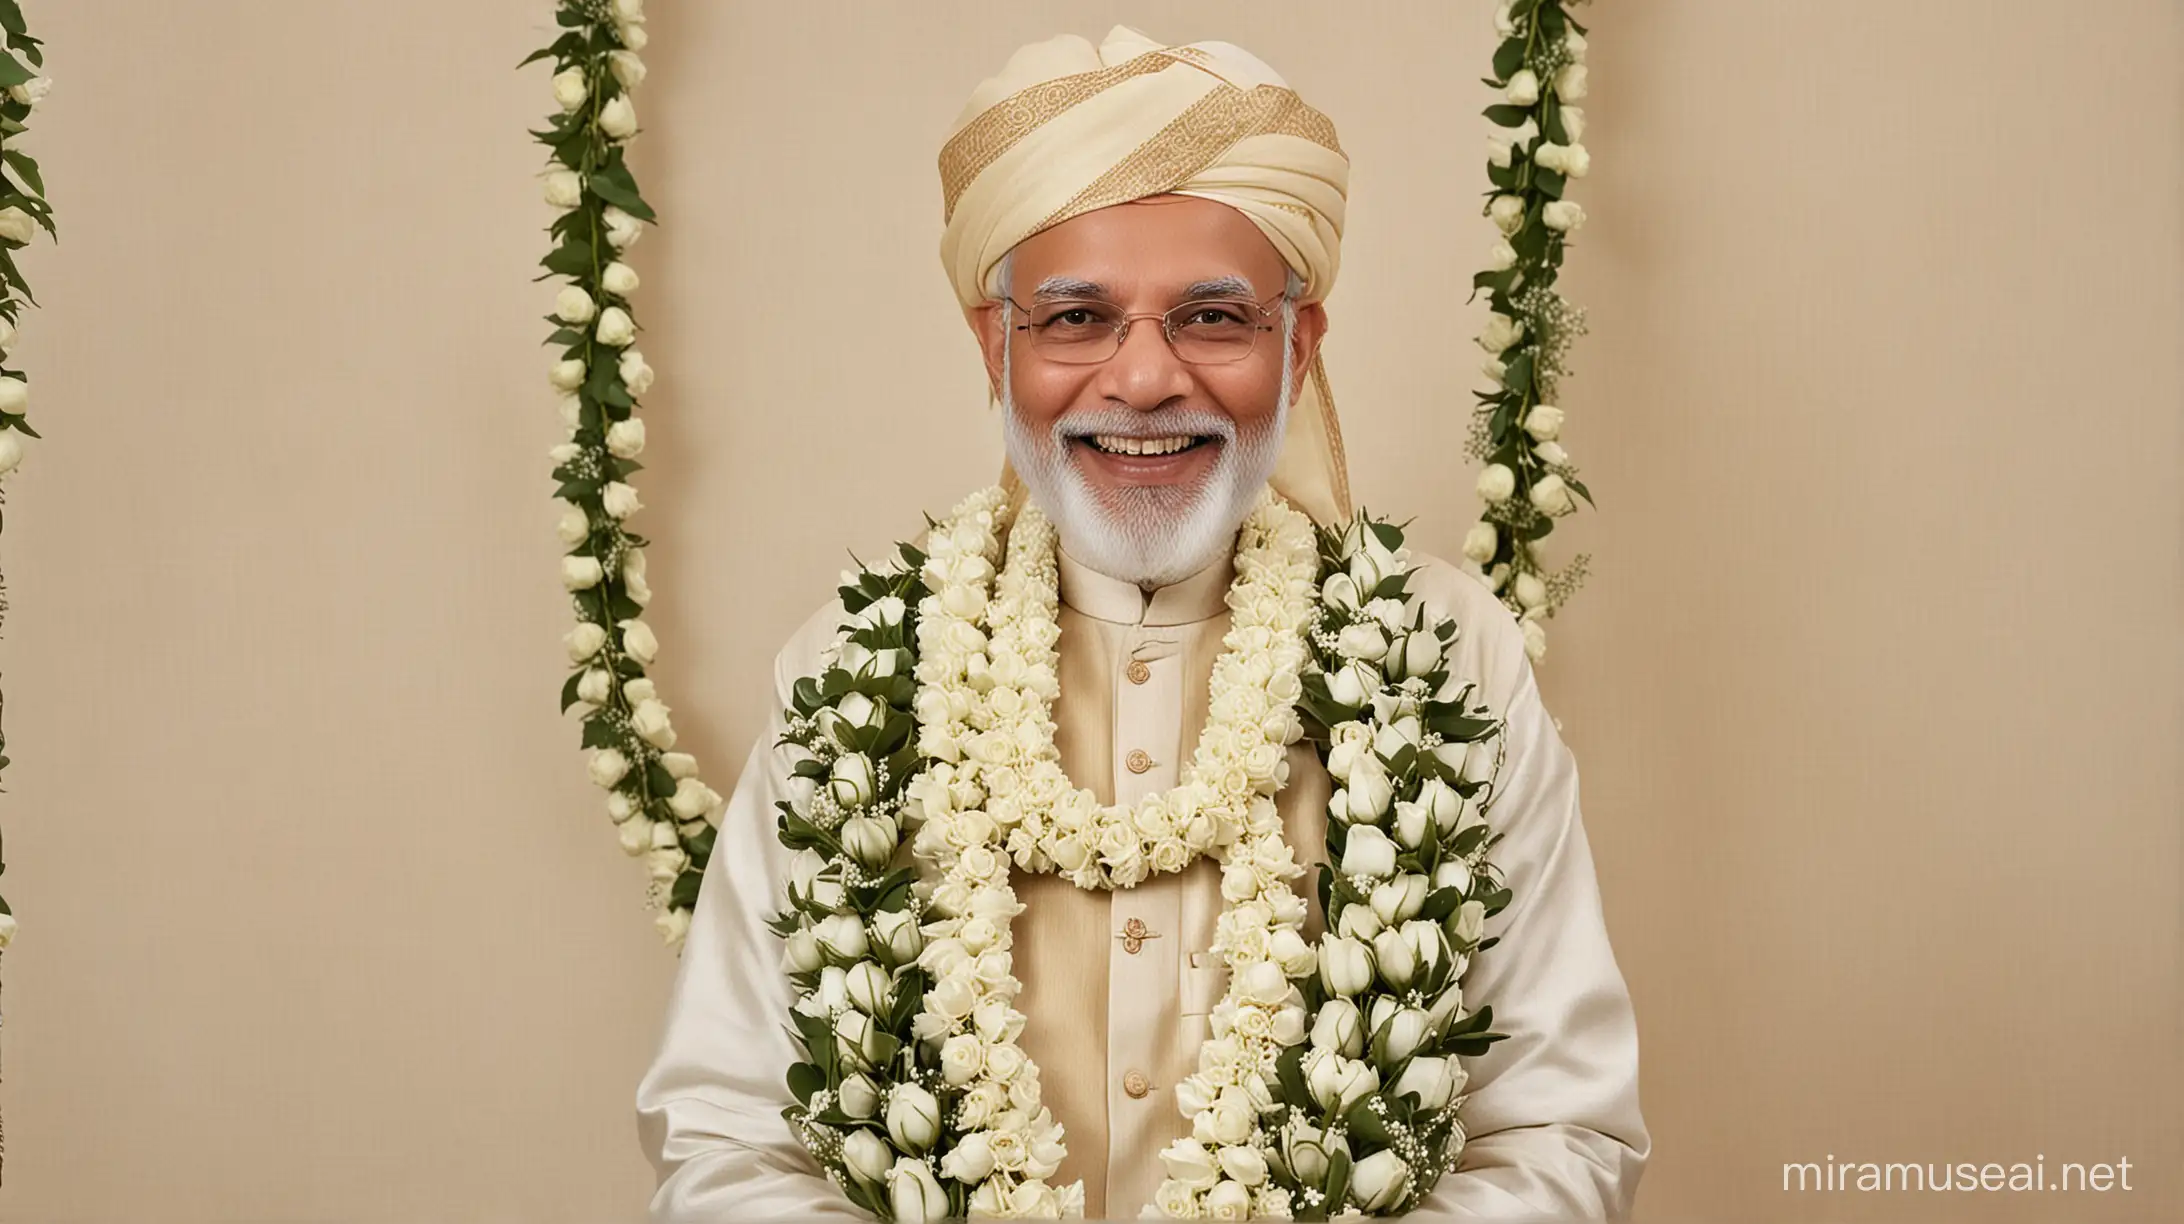 Indian Prime Minister Narendra Modi in Traditional Groom Attire with White Rose Garland